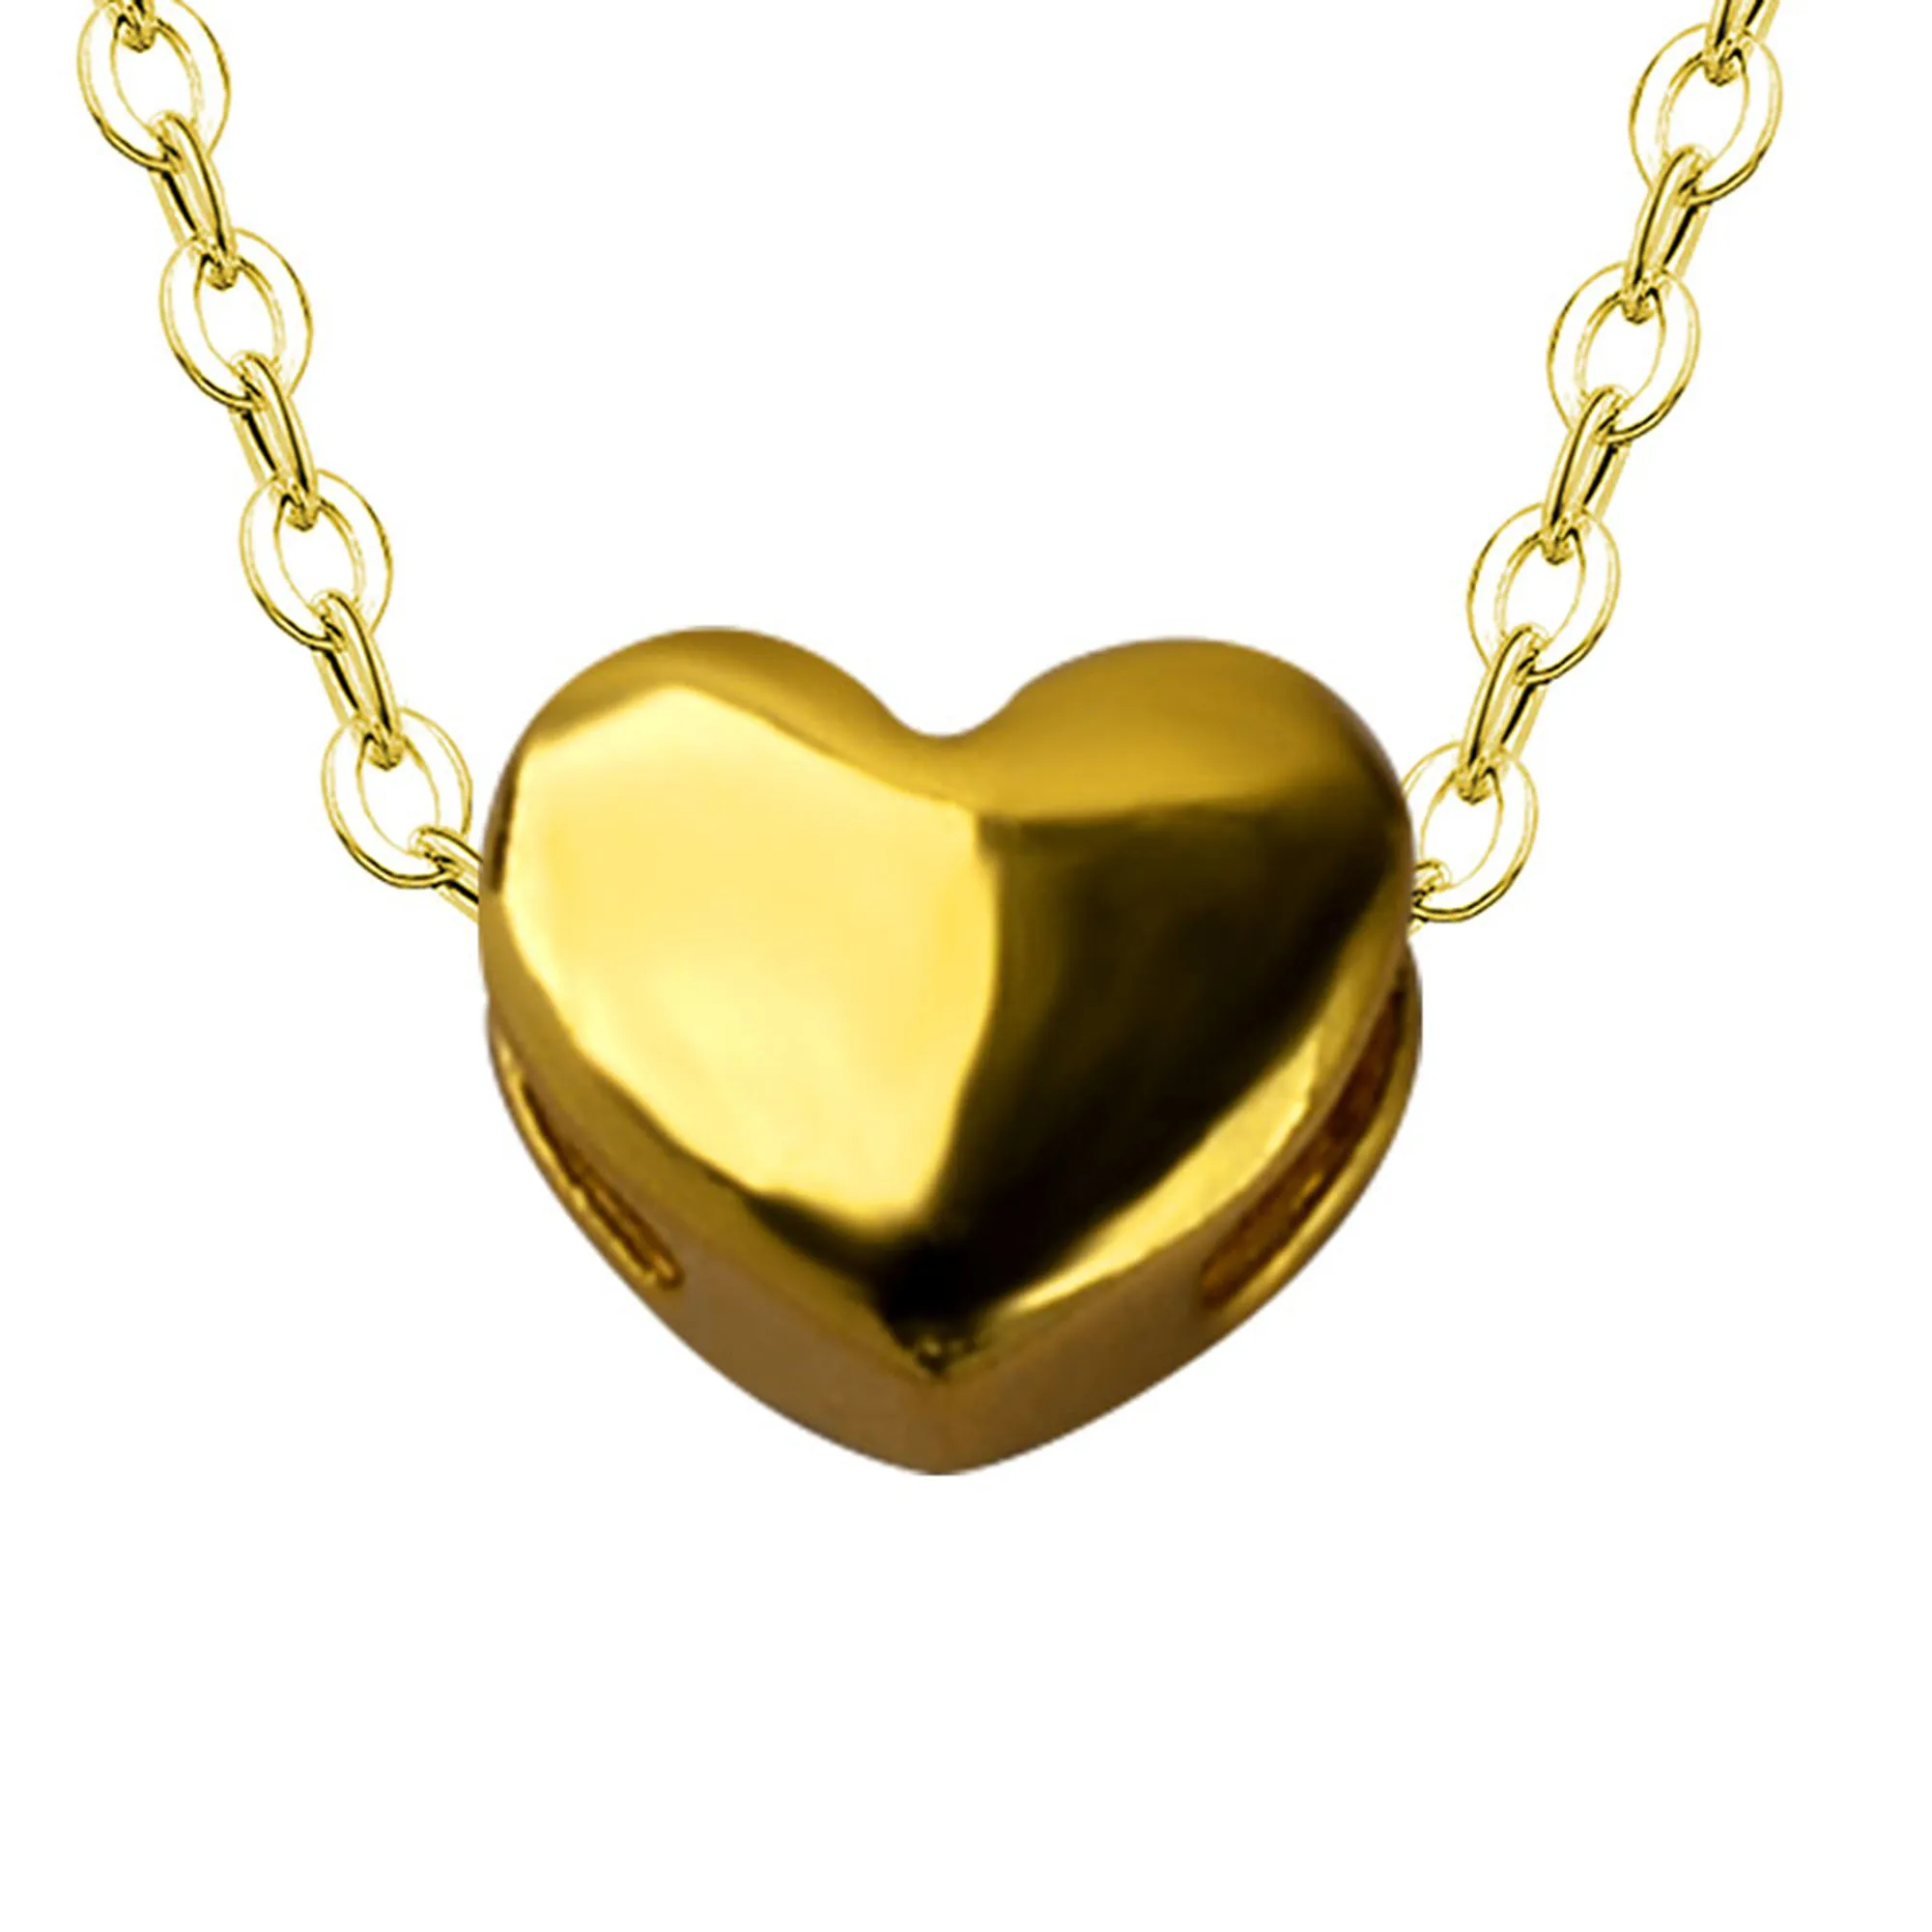 ZHIXI Real 24K Gold Jewelry Necklace Heart Pendant Solid Pure 18K AU750 Chain For Women Party Fine Jewelry X506